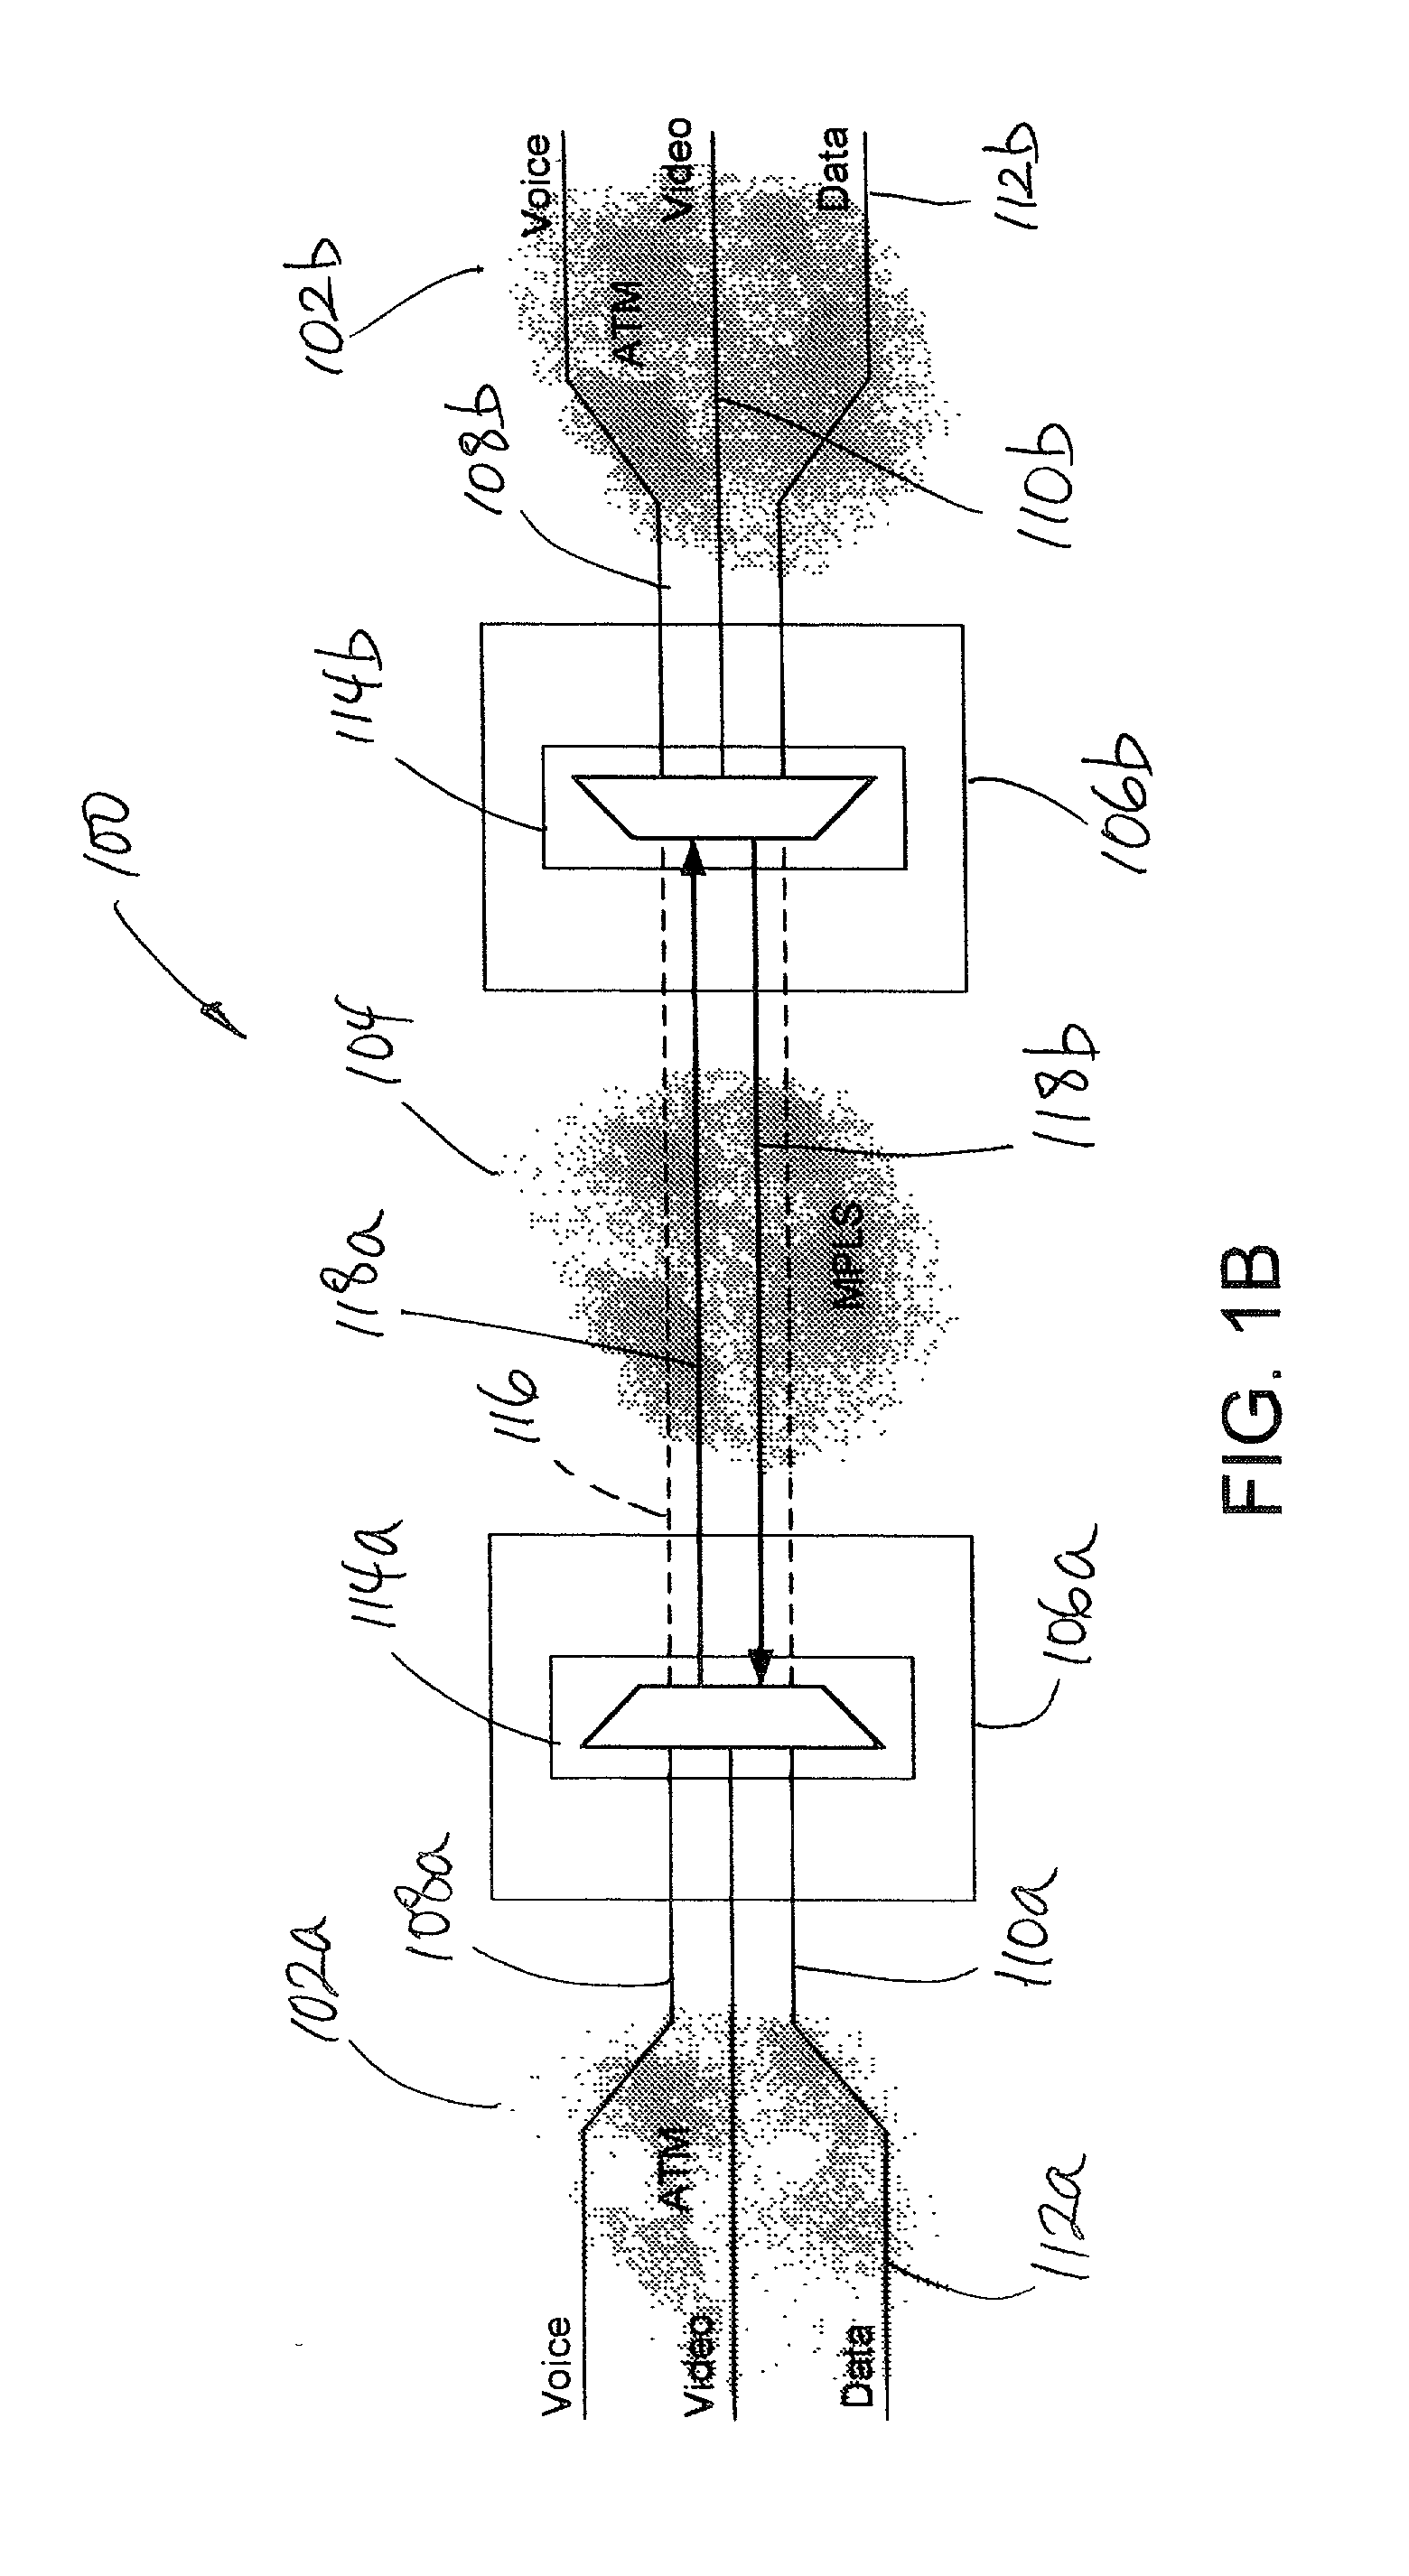 Method and system for mediating traffic between an asynchronous transfer mode (ATM) network and an adjacent network